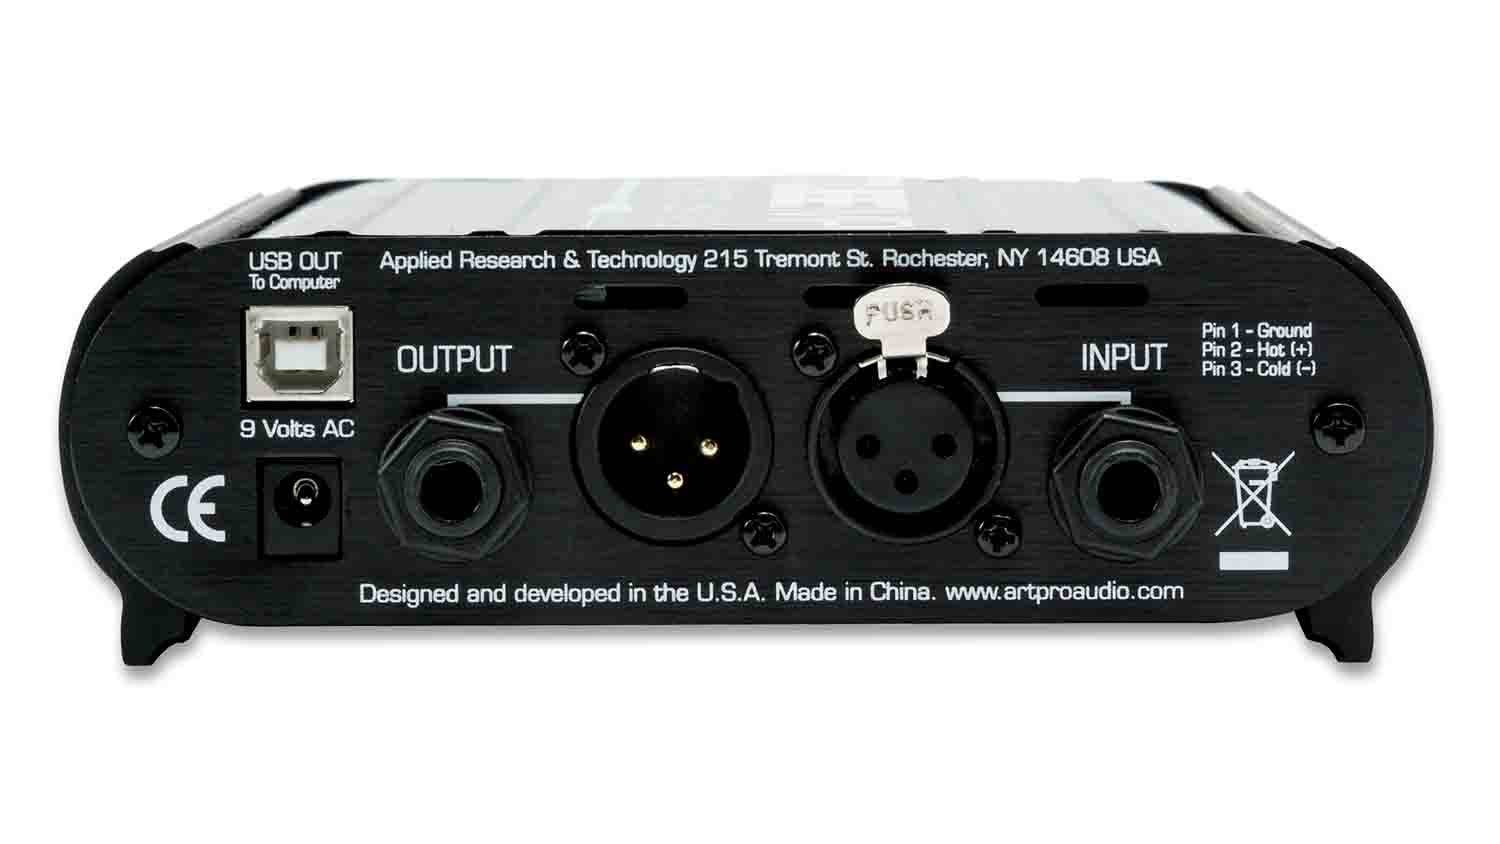 Art TUBEMPUSB Project Series Microphone Audio Interface with USB Output - Hollywood DJ